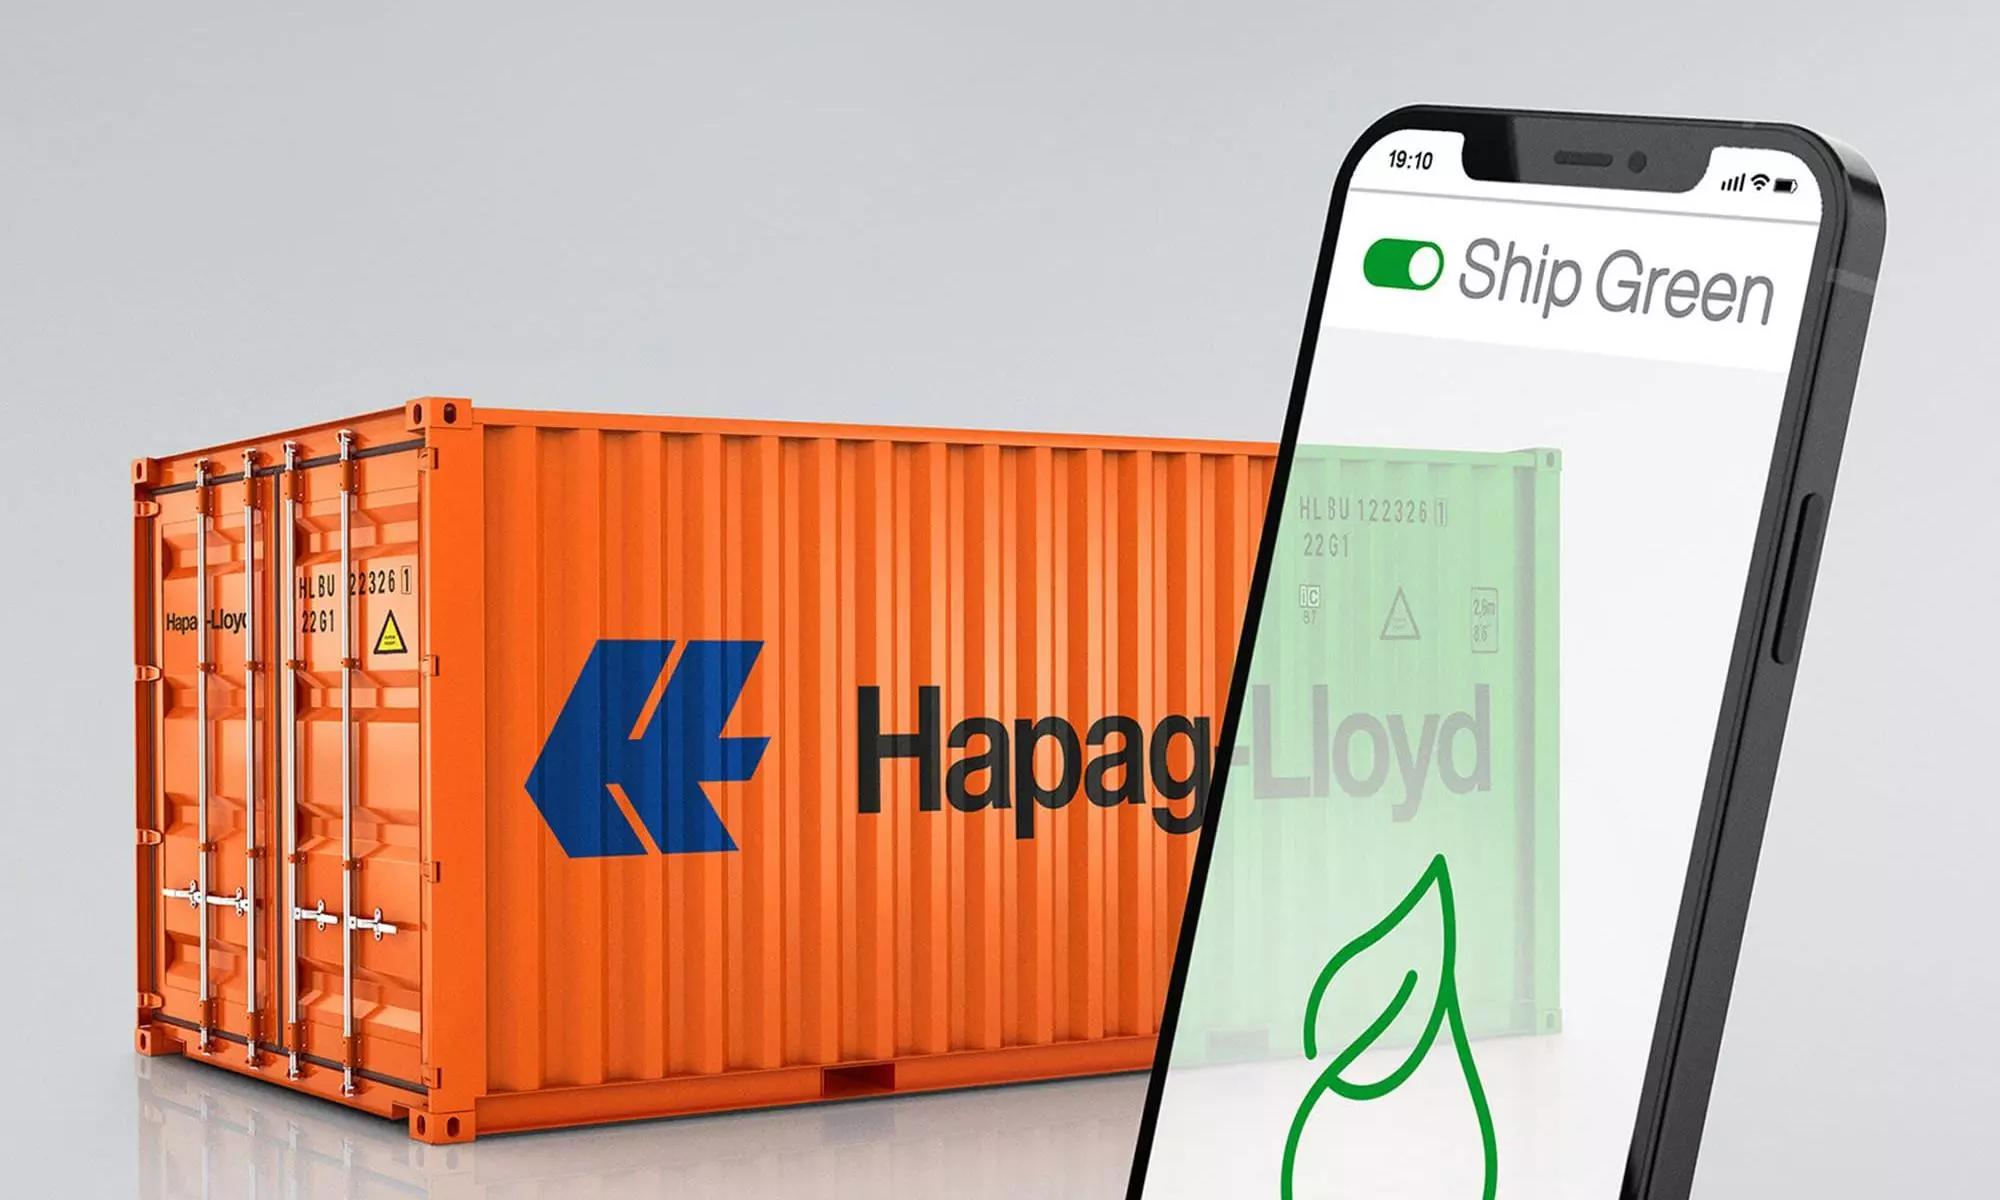 Hapag-Lloyd launches Ship Green transport solution